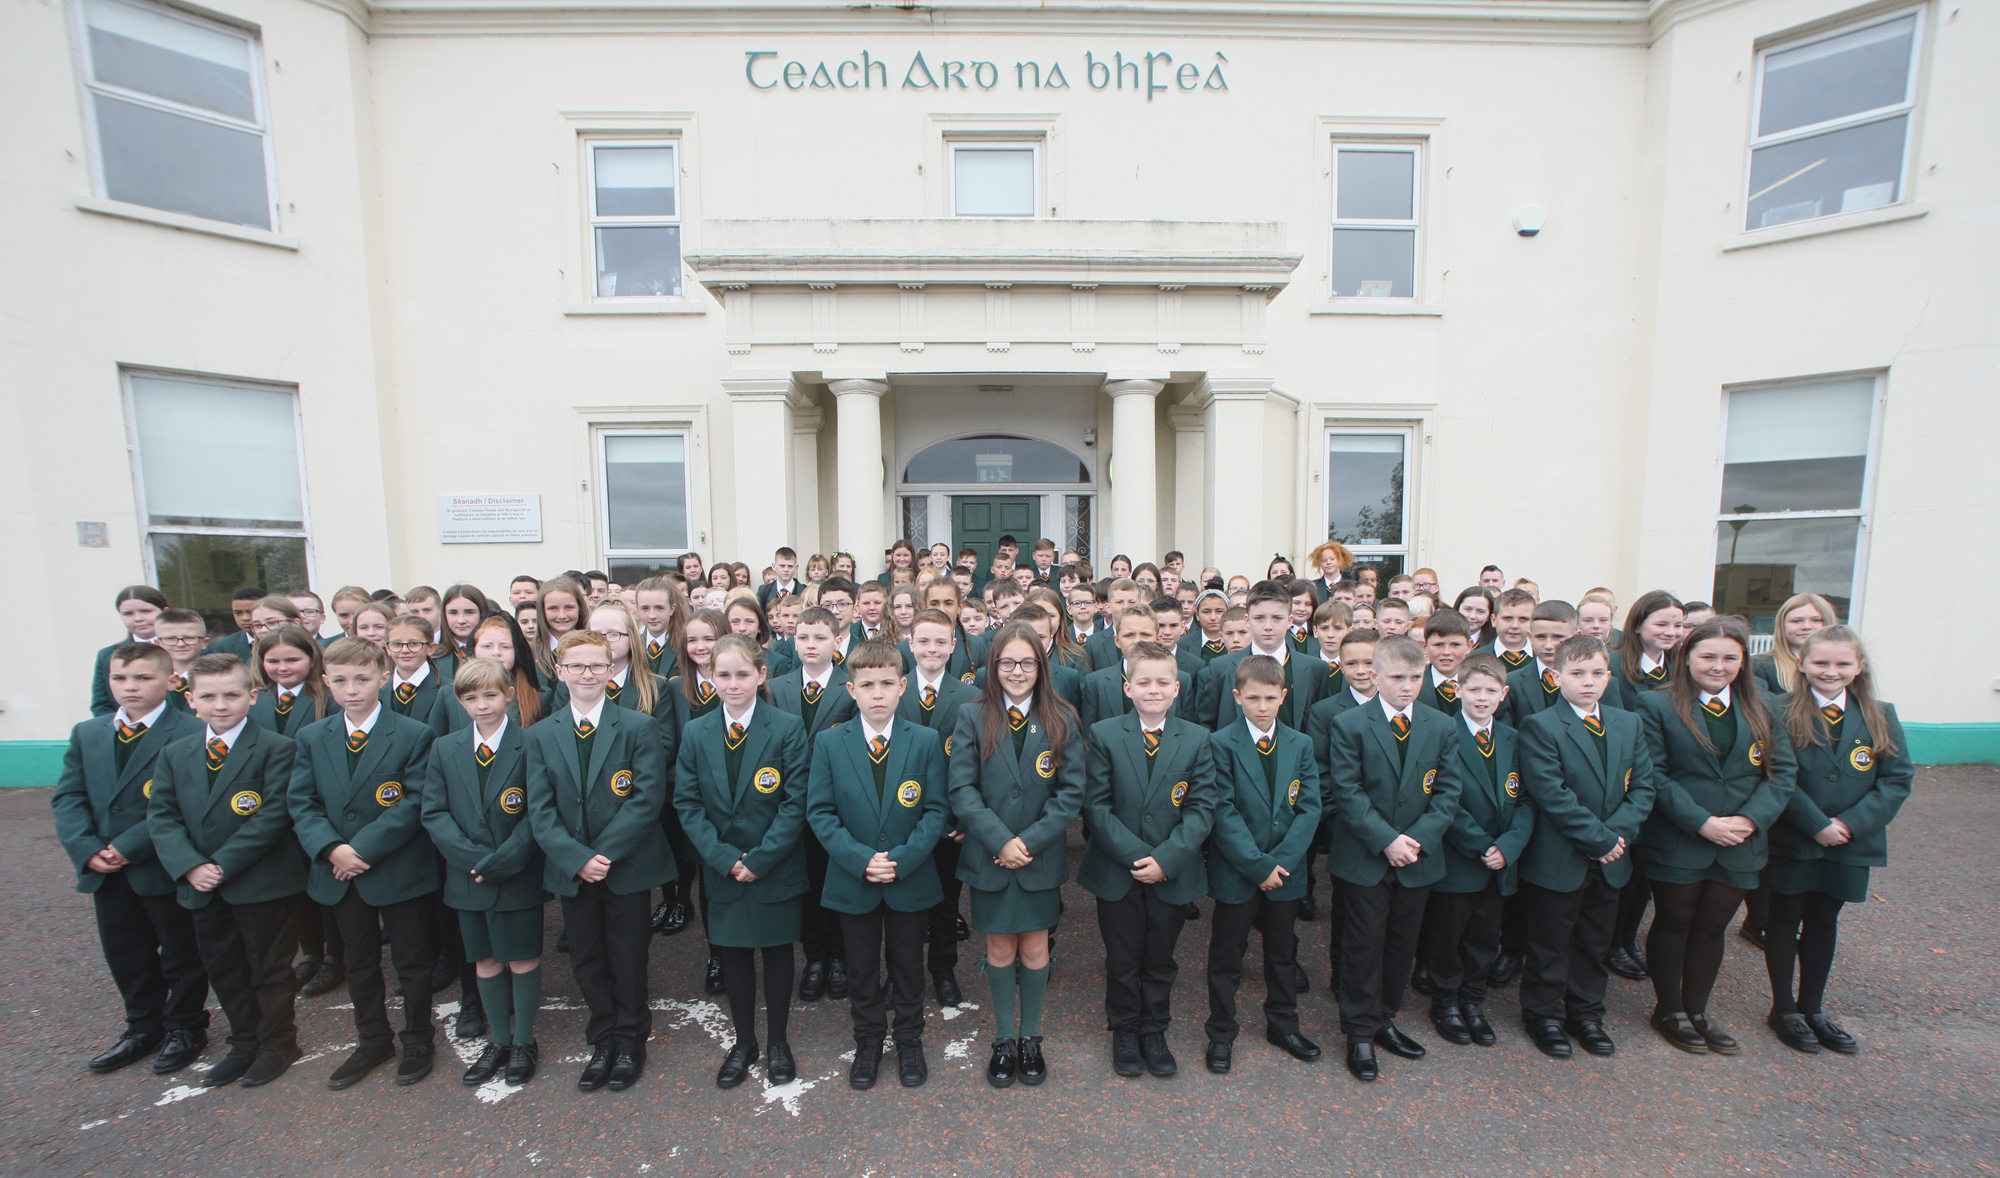 MOL AN ÓIGE: Over 150 first years start at Coláiste Feirste - the greatest number to date